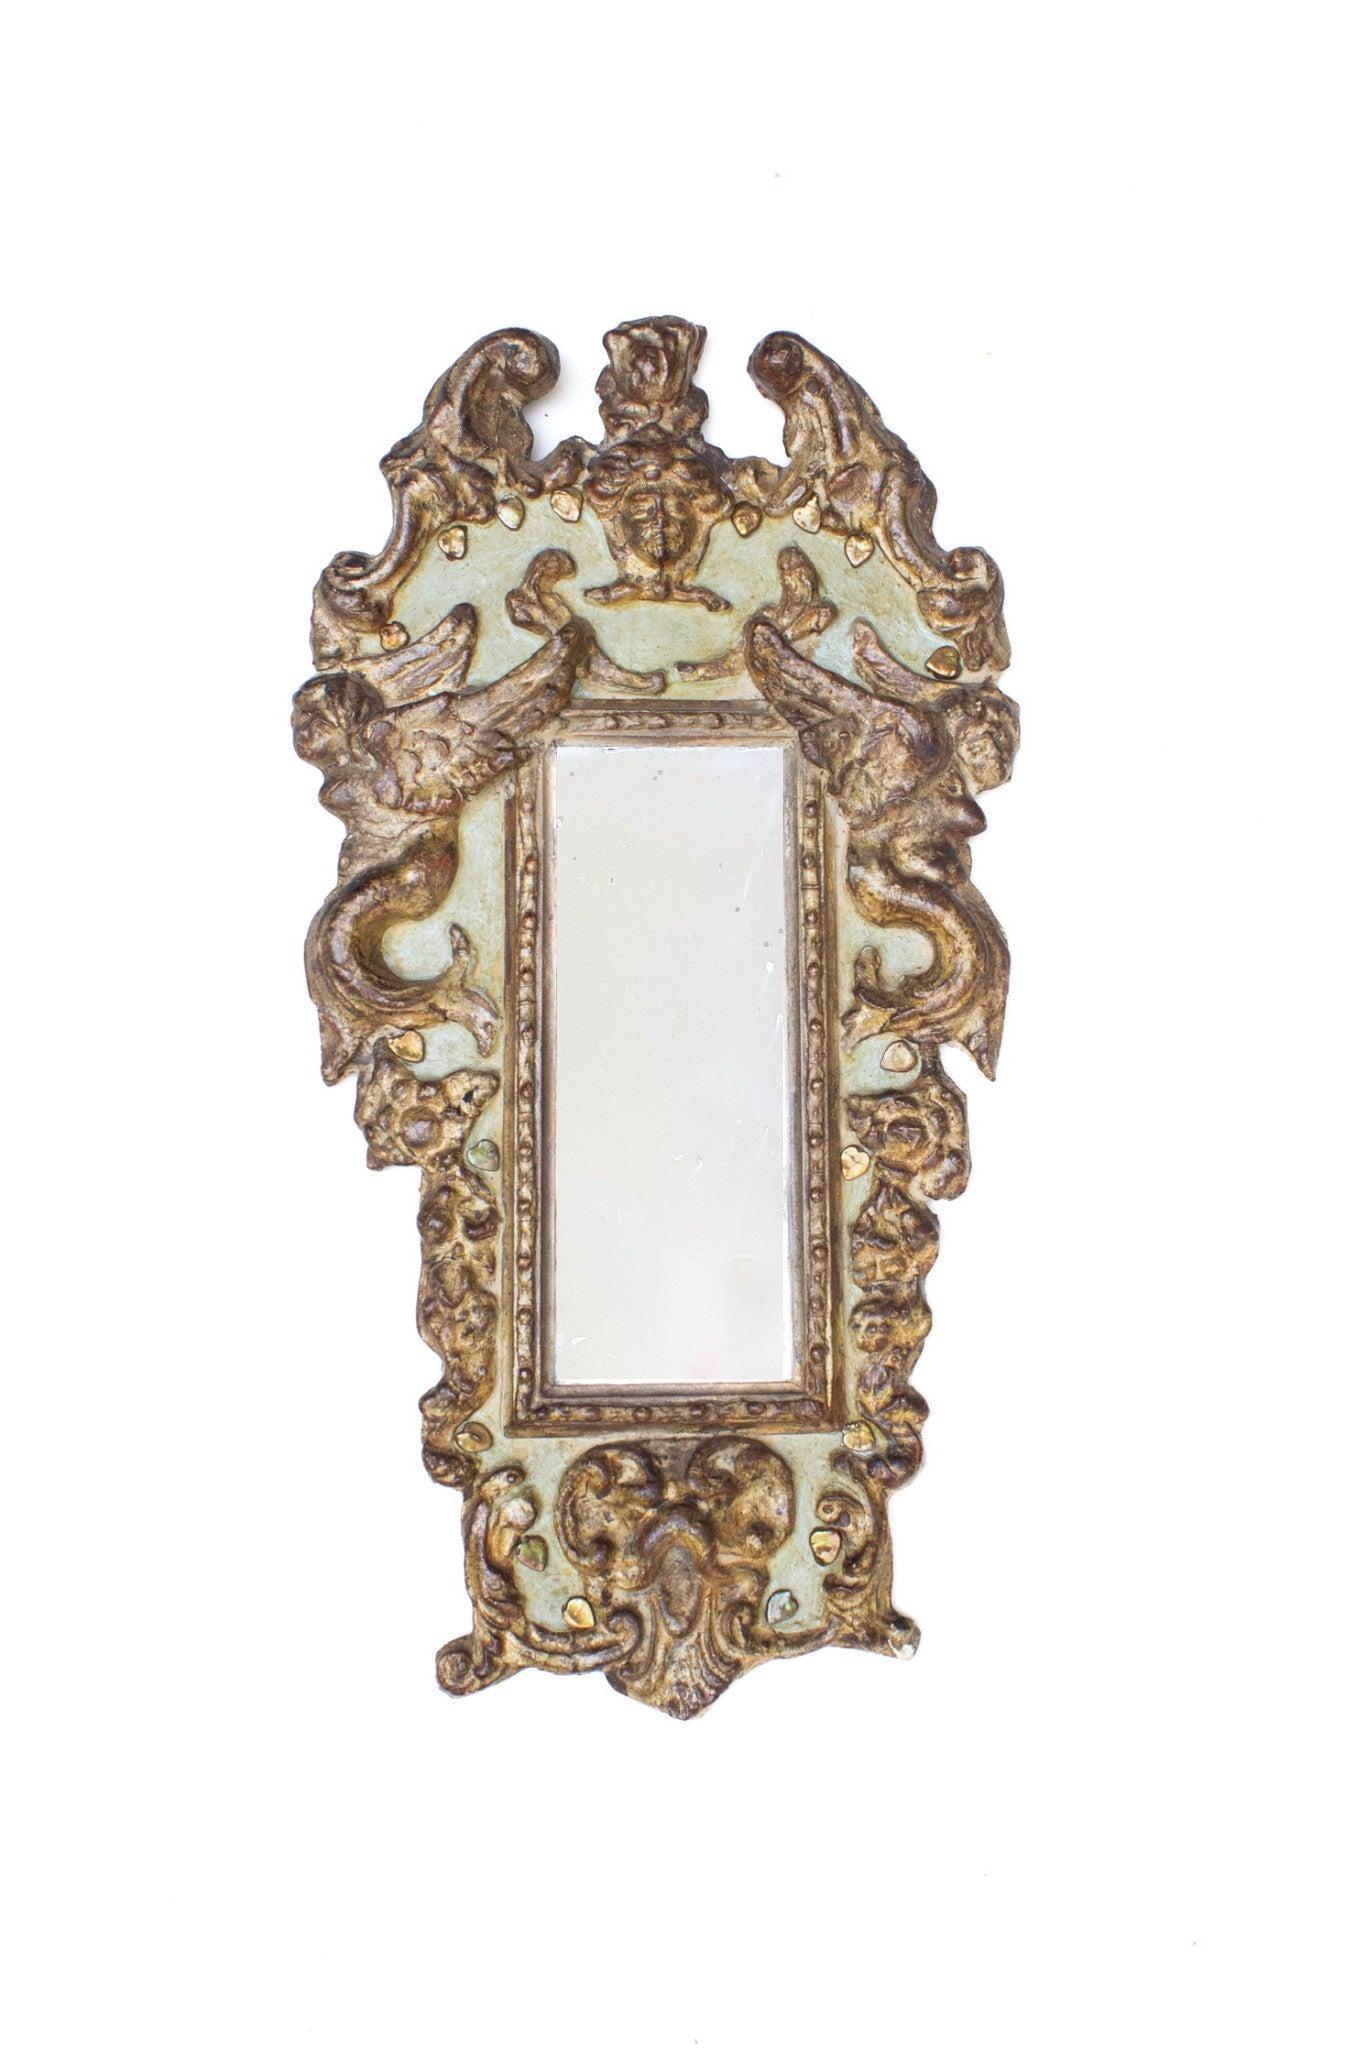 Hand-Painted Pair of 18th Century Italian Rococo Green and Gilded Cherub Mirrors For Sale